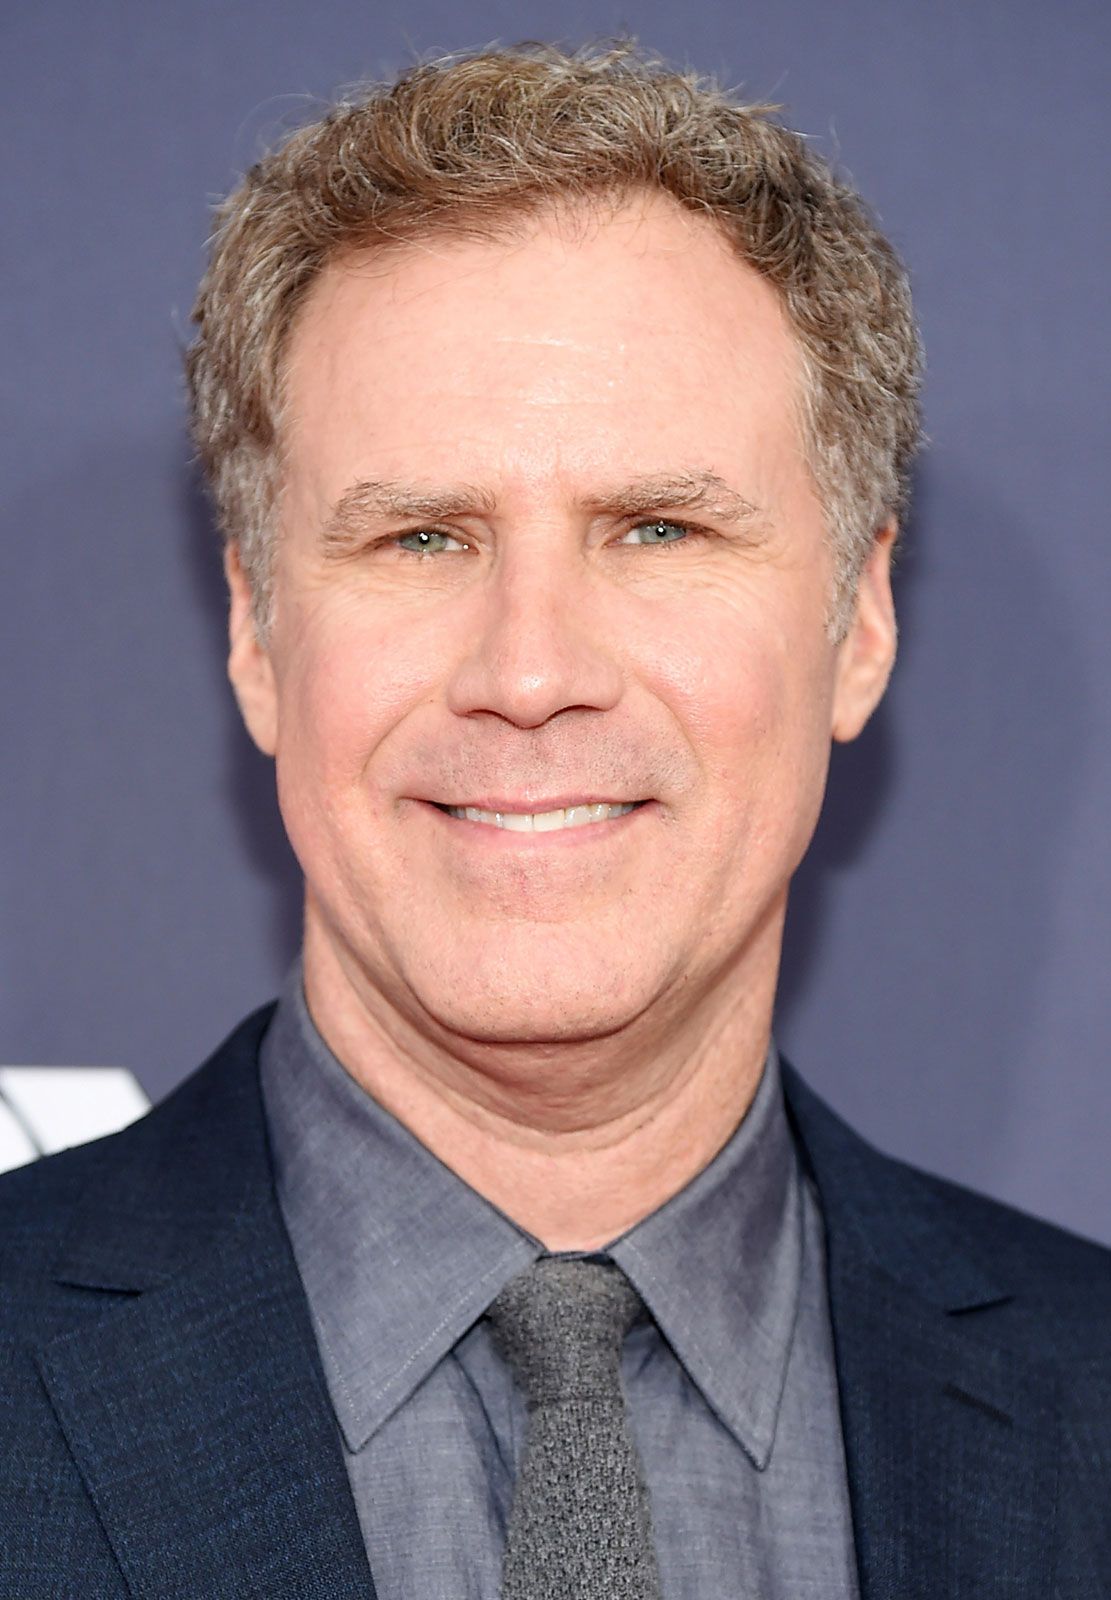 Will Ferrell - SNL to Comedy Blockbusters - The 90's Comedy Icons Who Became Legends